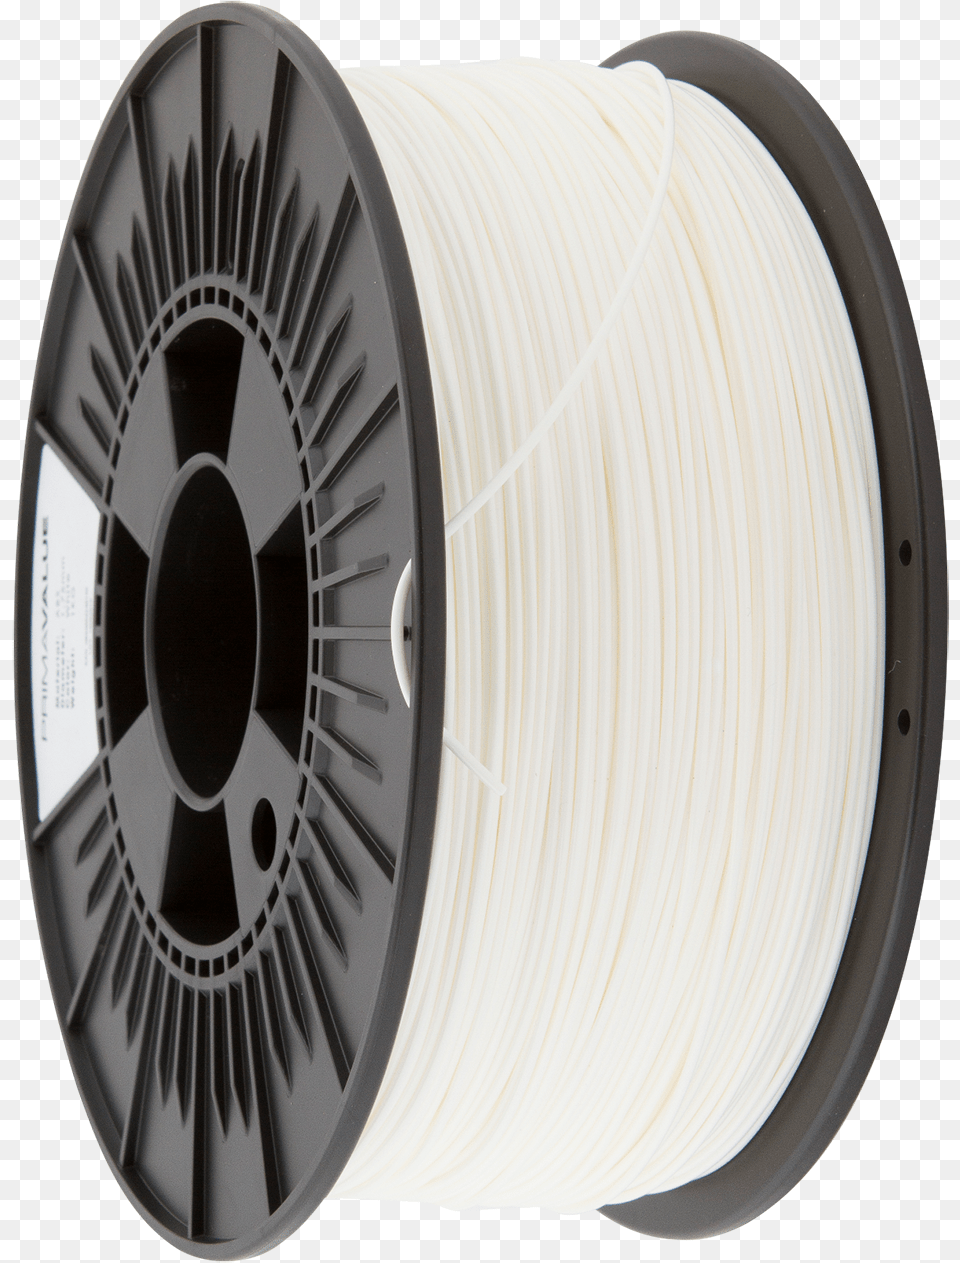 Primavalue Abs Filament Abs Filament 175 Mm, Reel, Wire Free Png